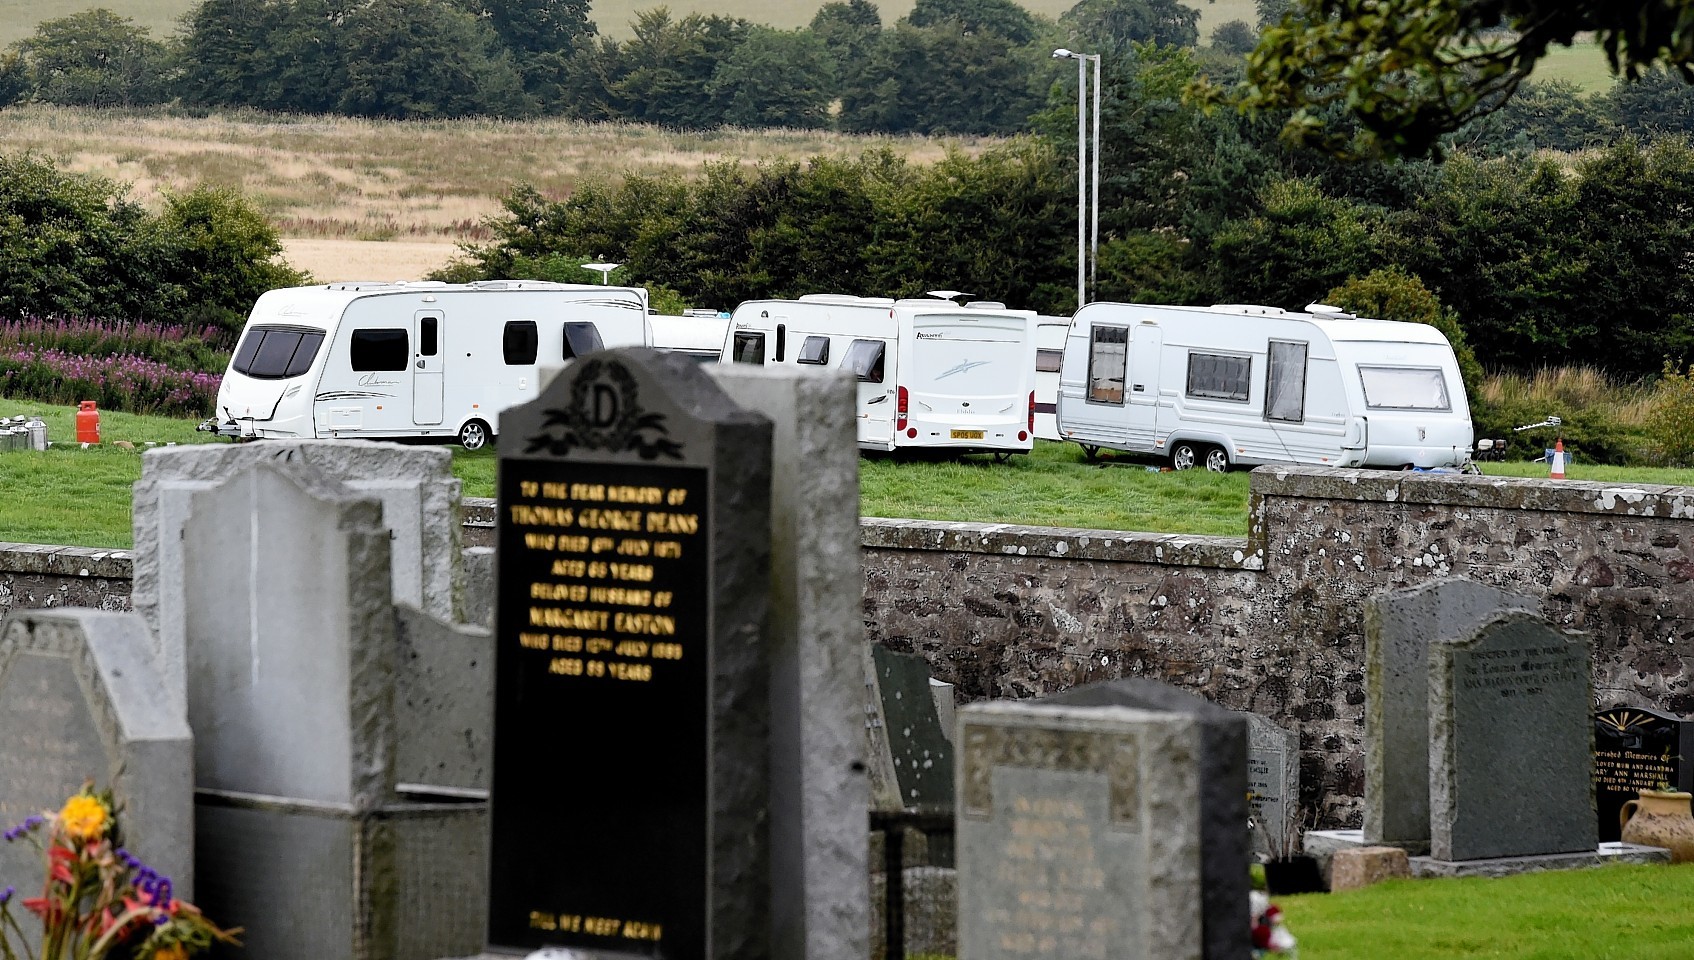 Travellers were previously spotted at the site